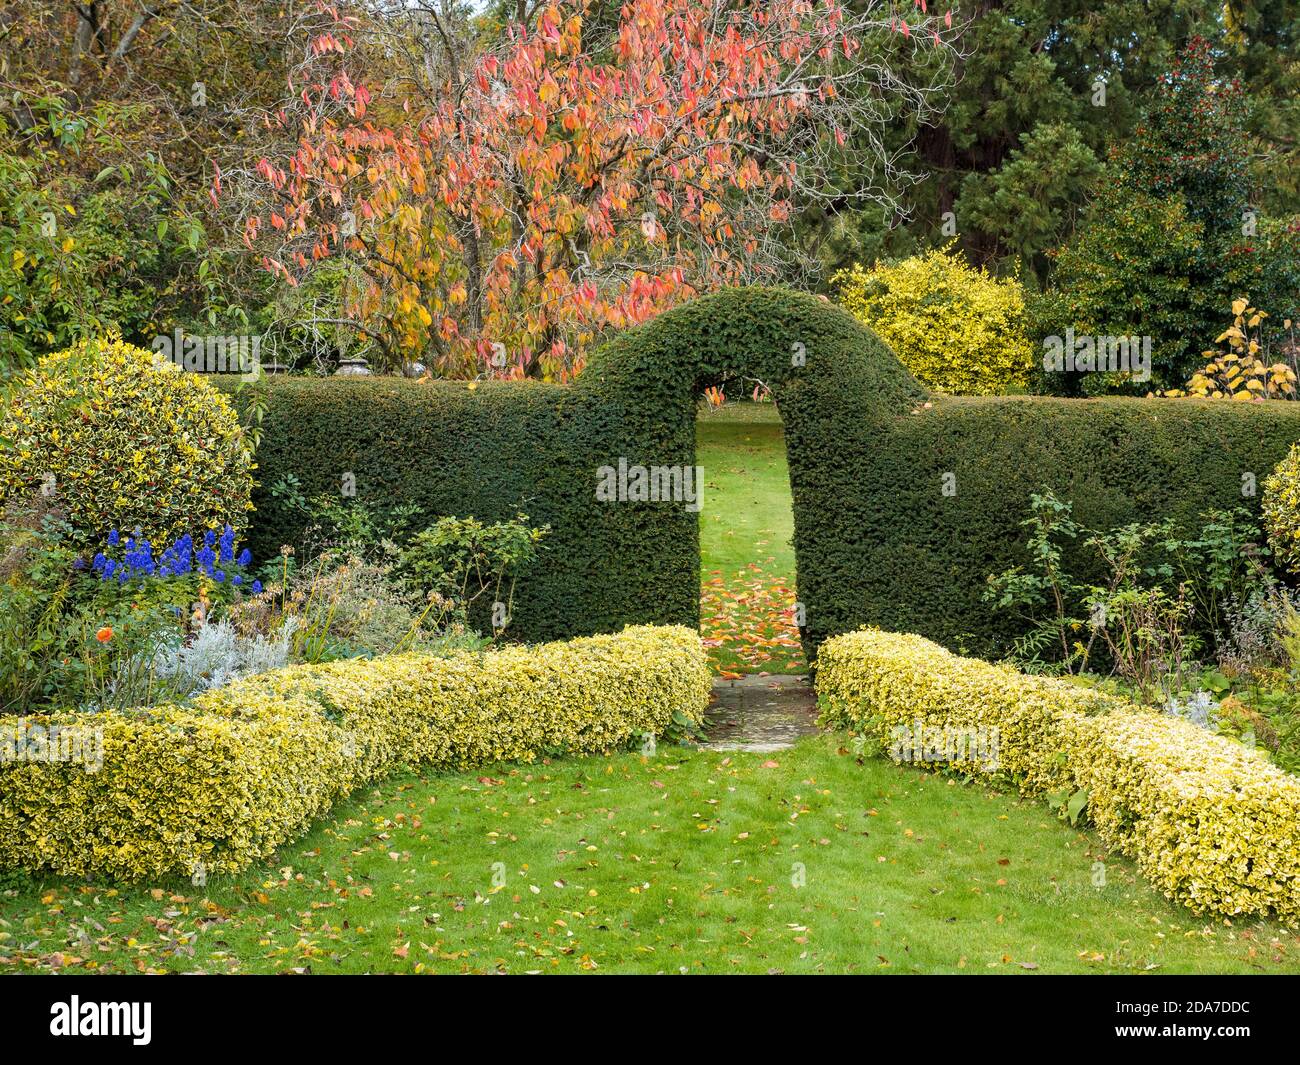 Hedge Garden with Arch, Englefield House Garden, Englefield Estate, Englefield, Berkshire, England, UK, GB. Stock Photo